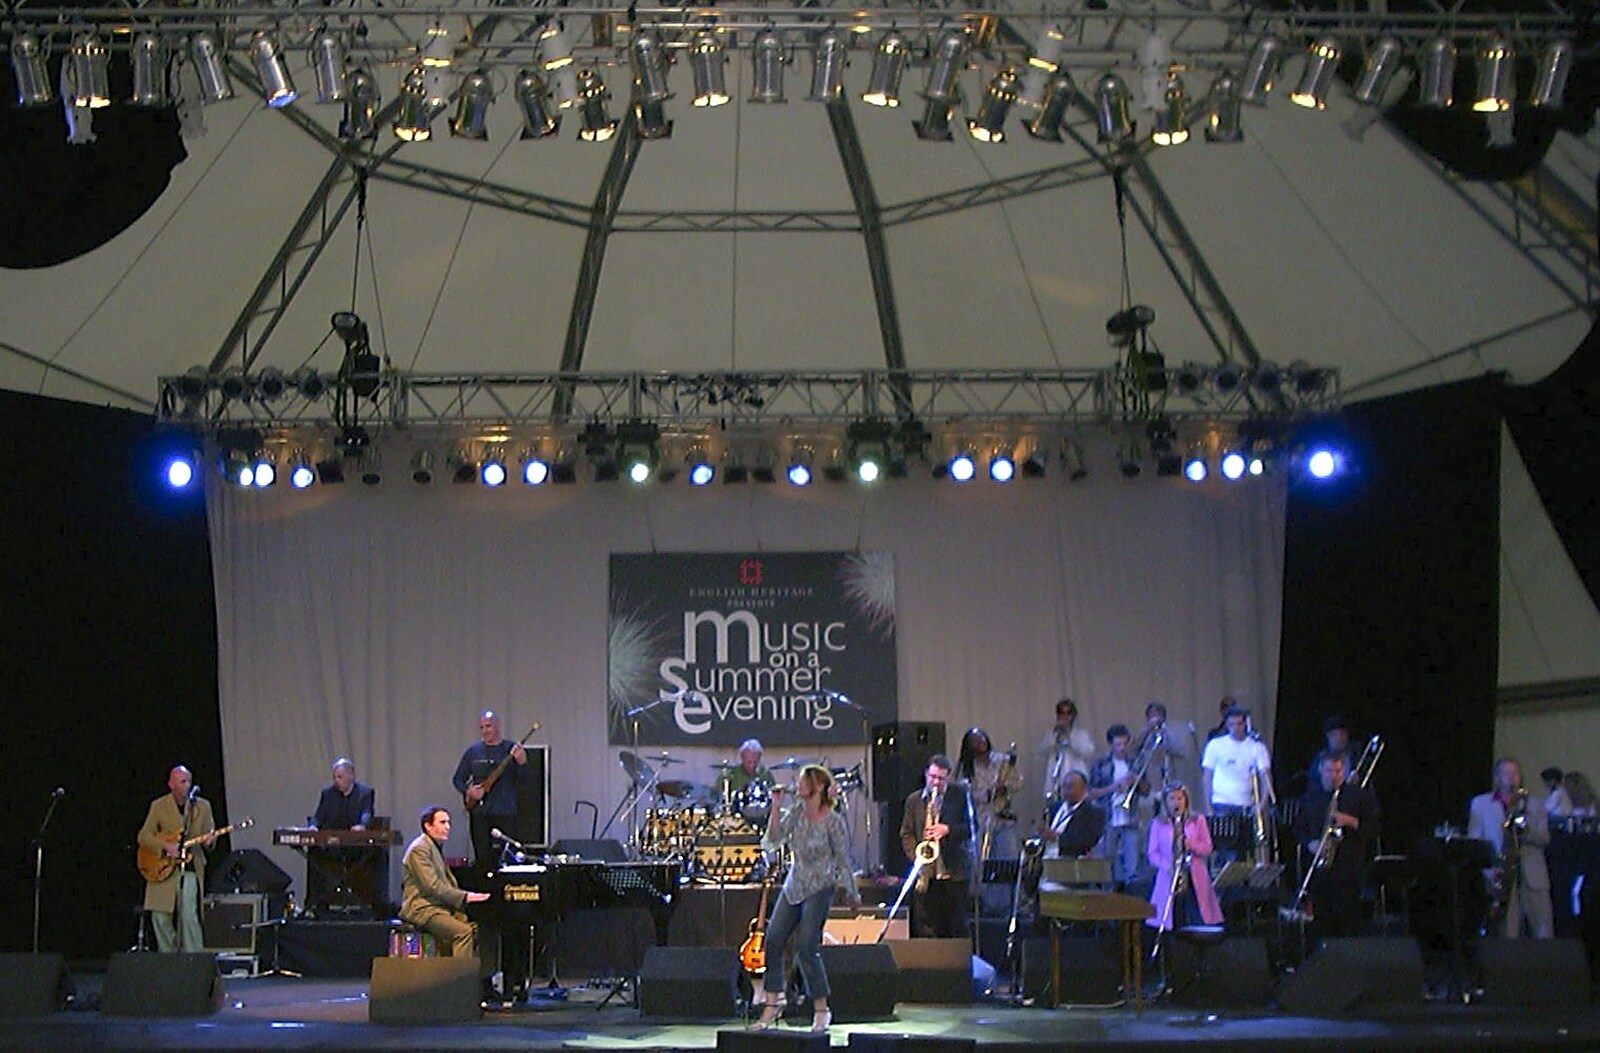 3G Lab at Jools Holland, Audley End, Saffron Walden, Essex - 25th July 2004: Jools Holland does his thing